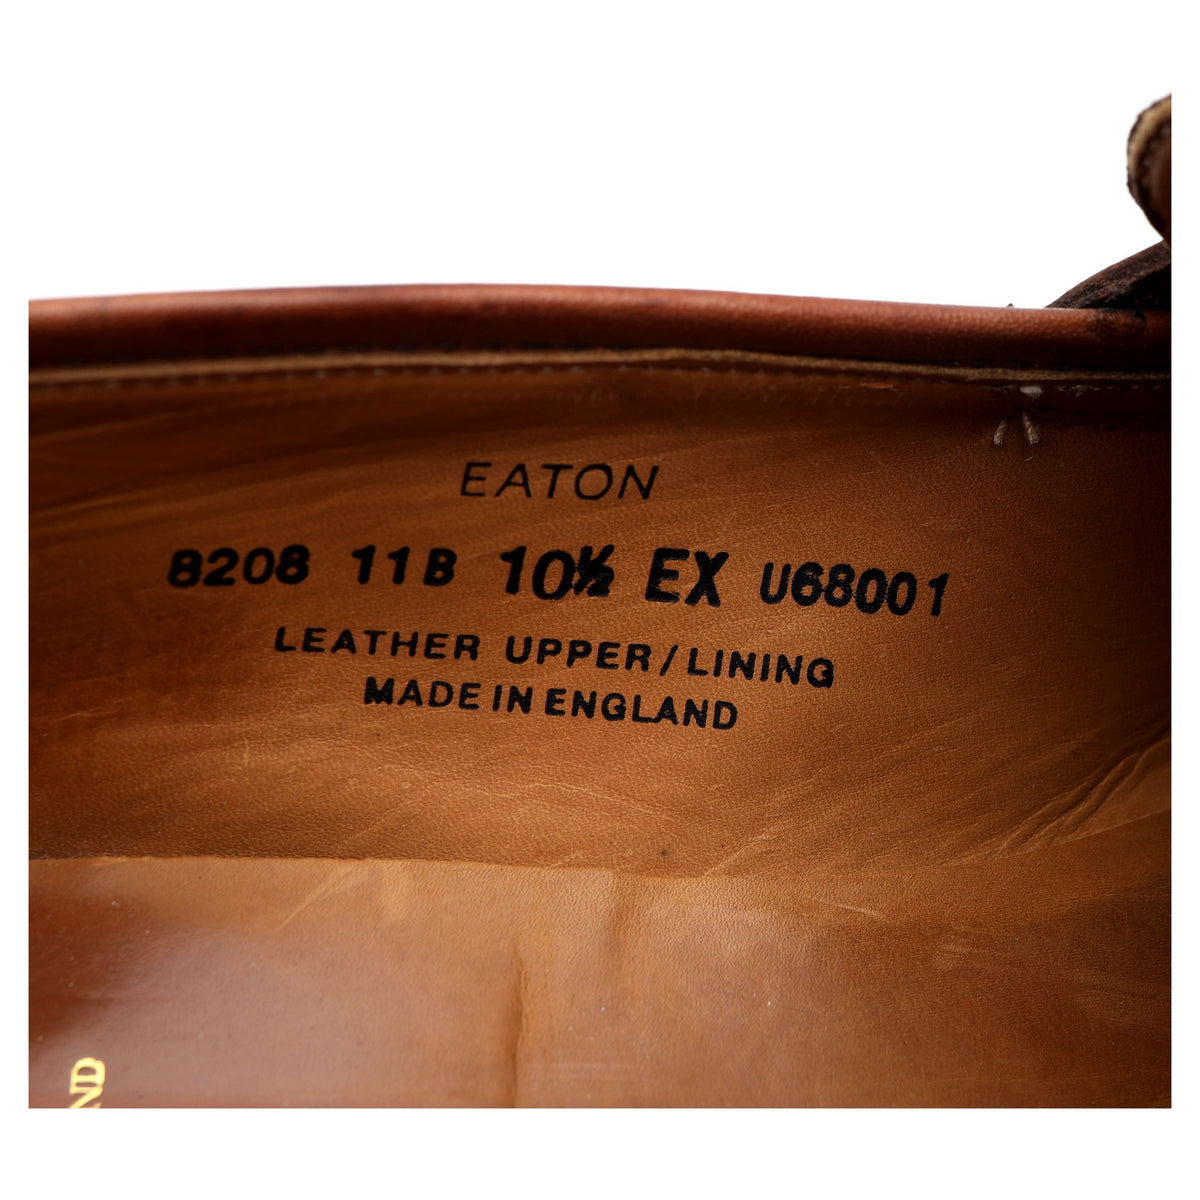 &#39;Eaton&#39; Tan Brown Leather Loafers UK 10.5 EX